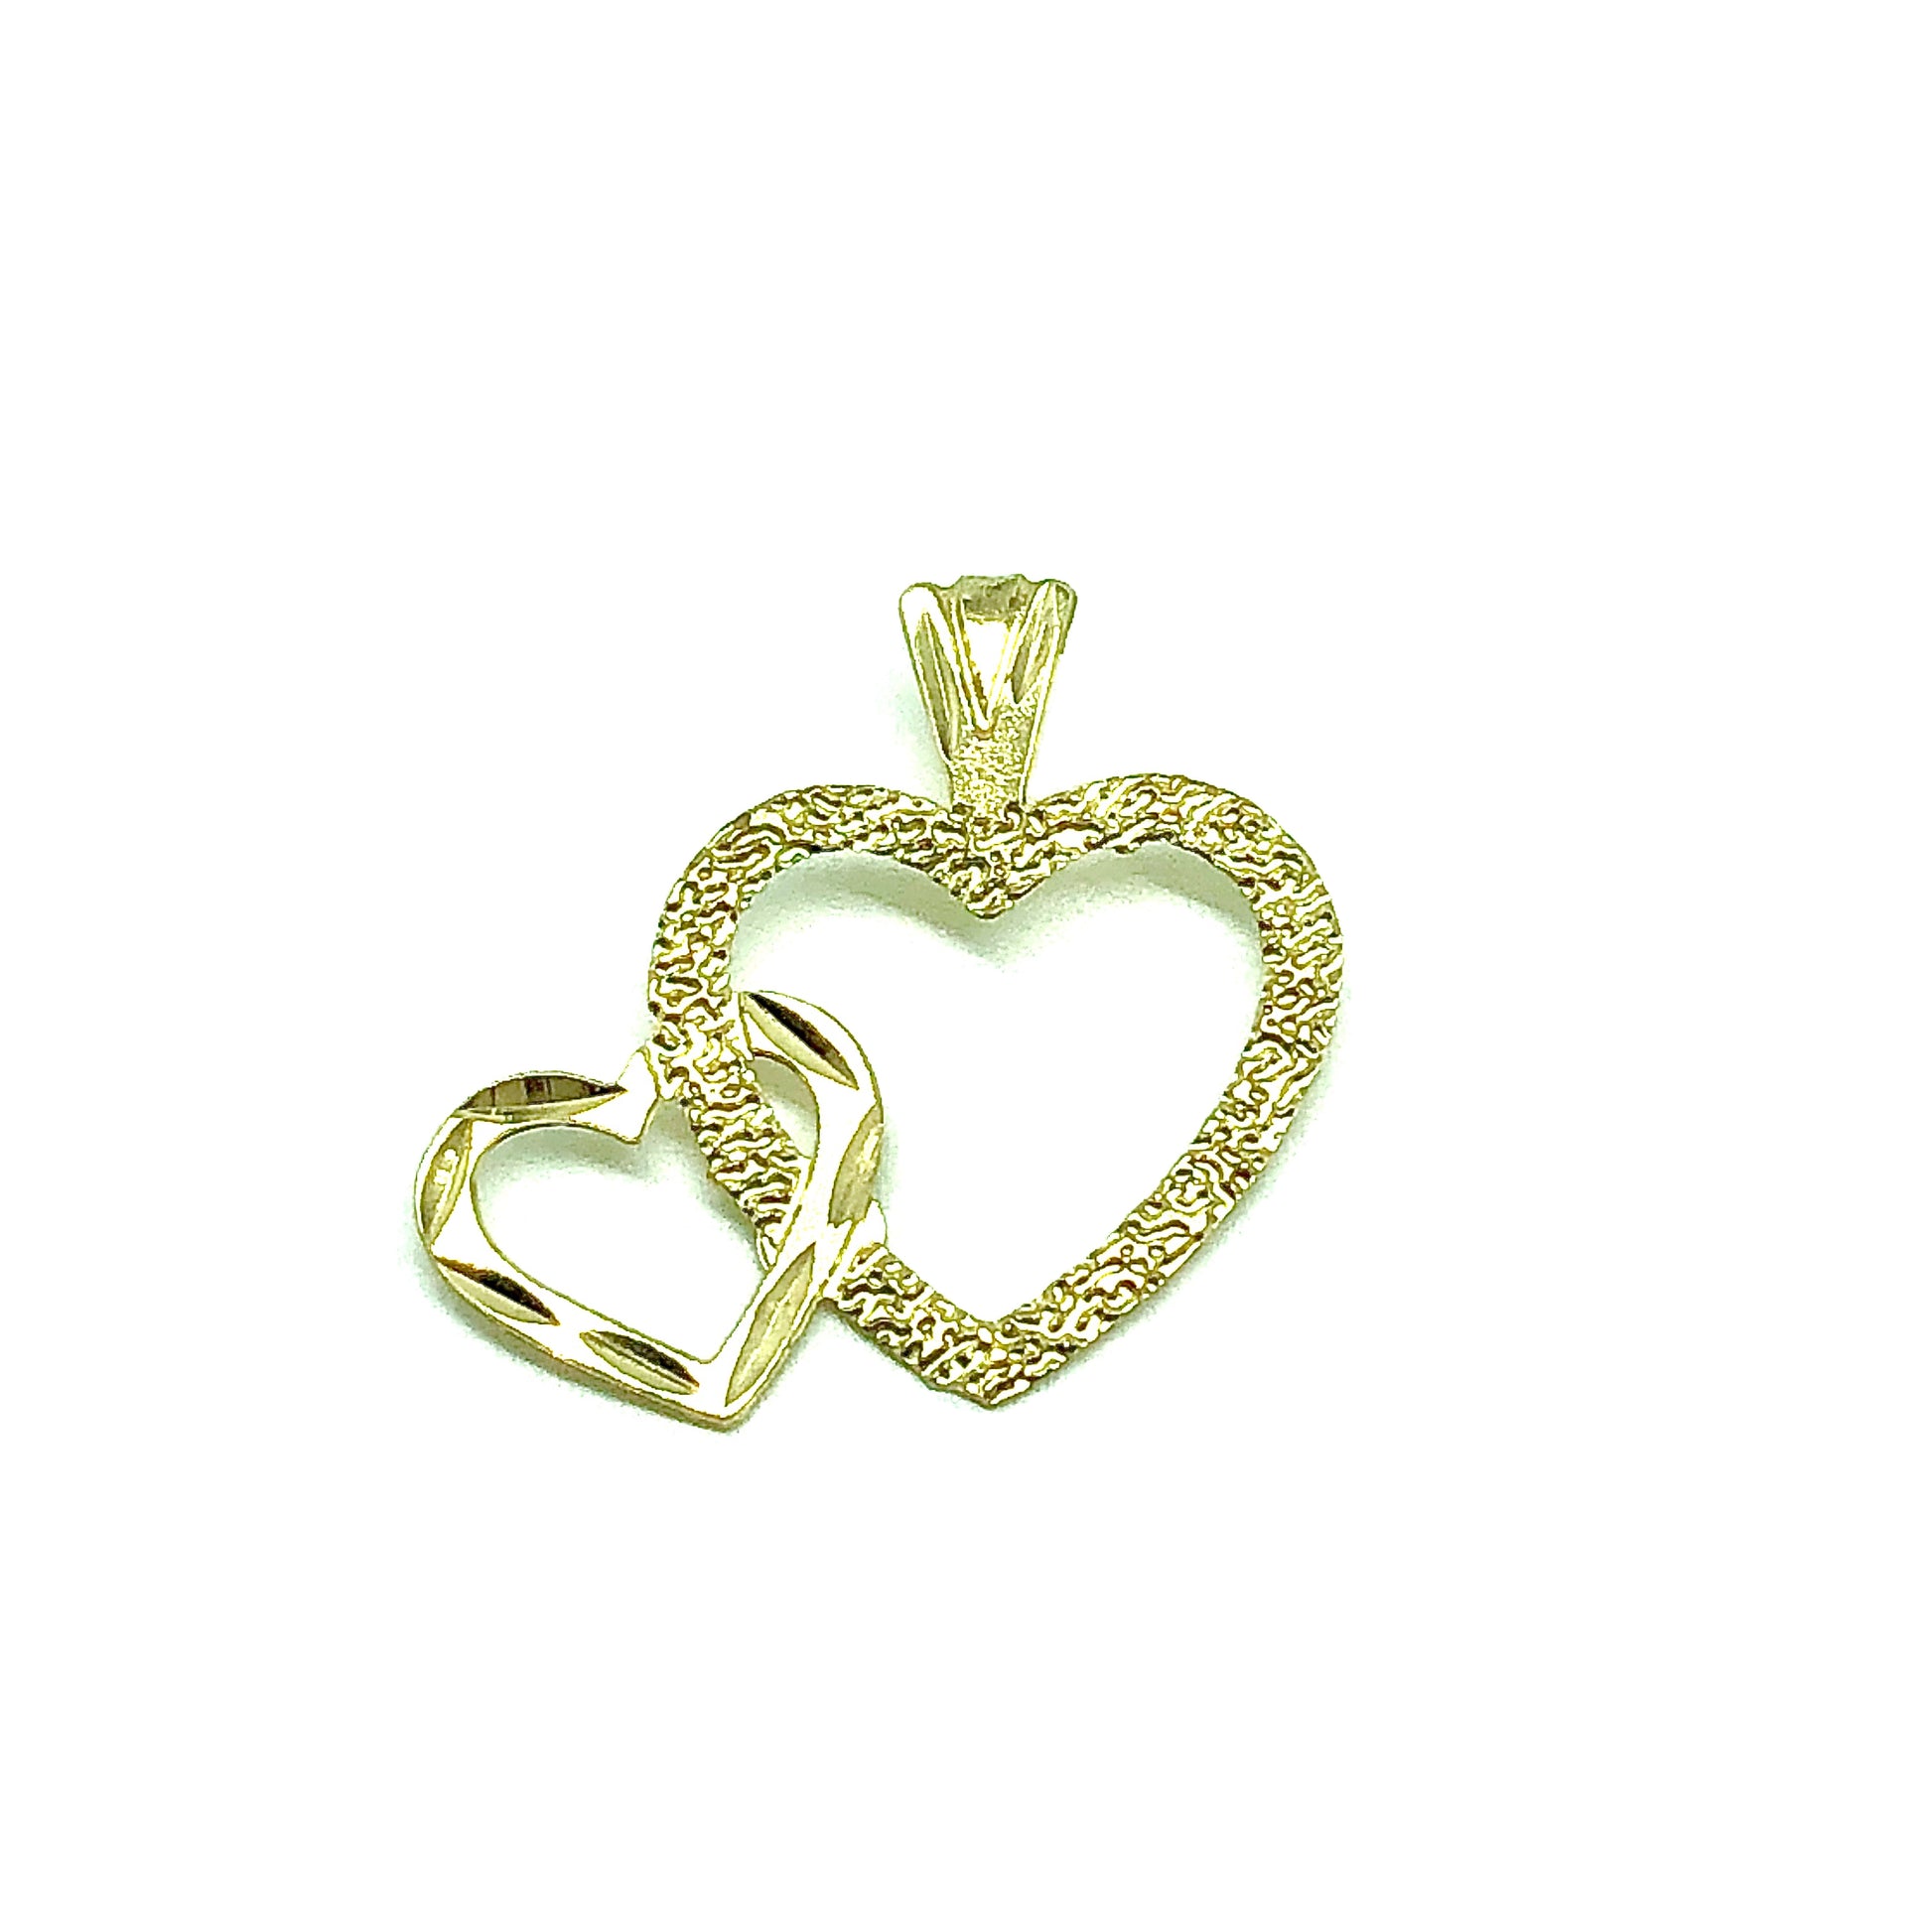 14k Yellow Gold Glittery Textured Two Heart Charm Pendant